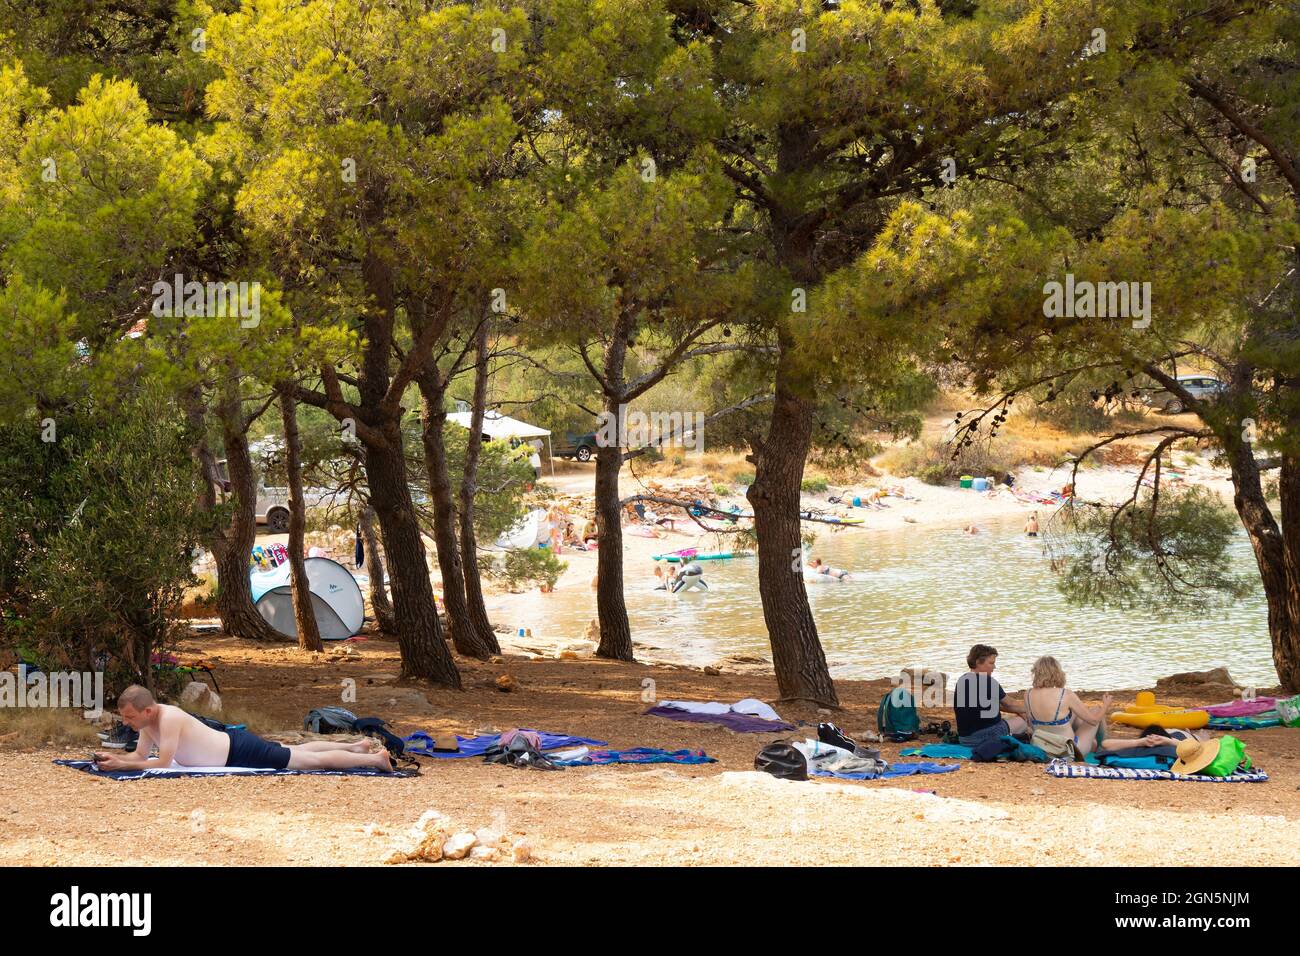 Kosirina, Murter, Croatia - August 24, 2021: People resting in the shade of pine trees on the beach and others swimming in a sea Stock Photo